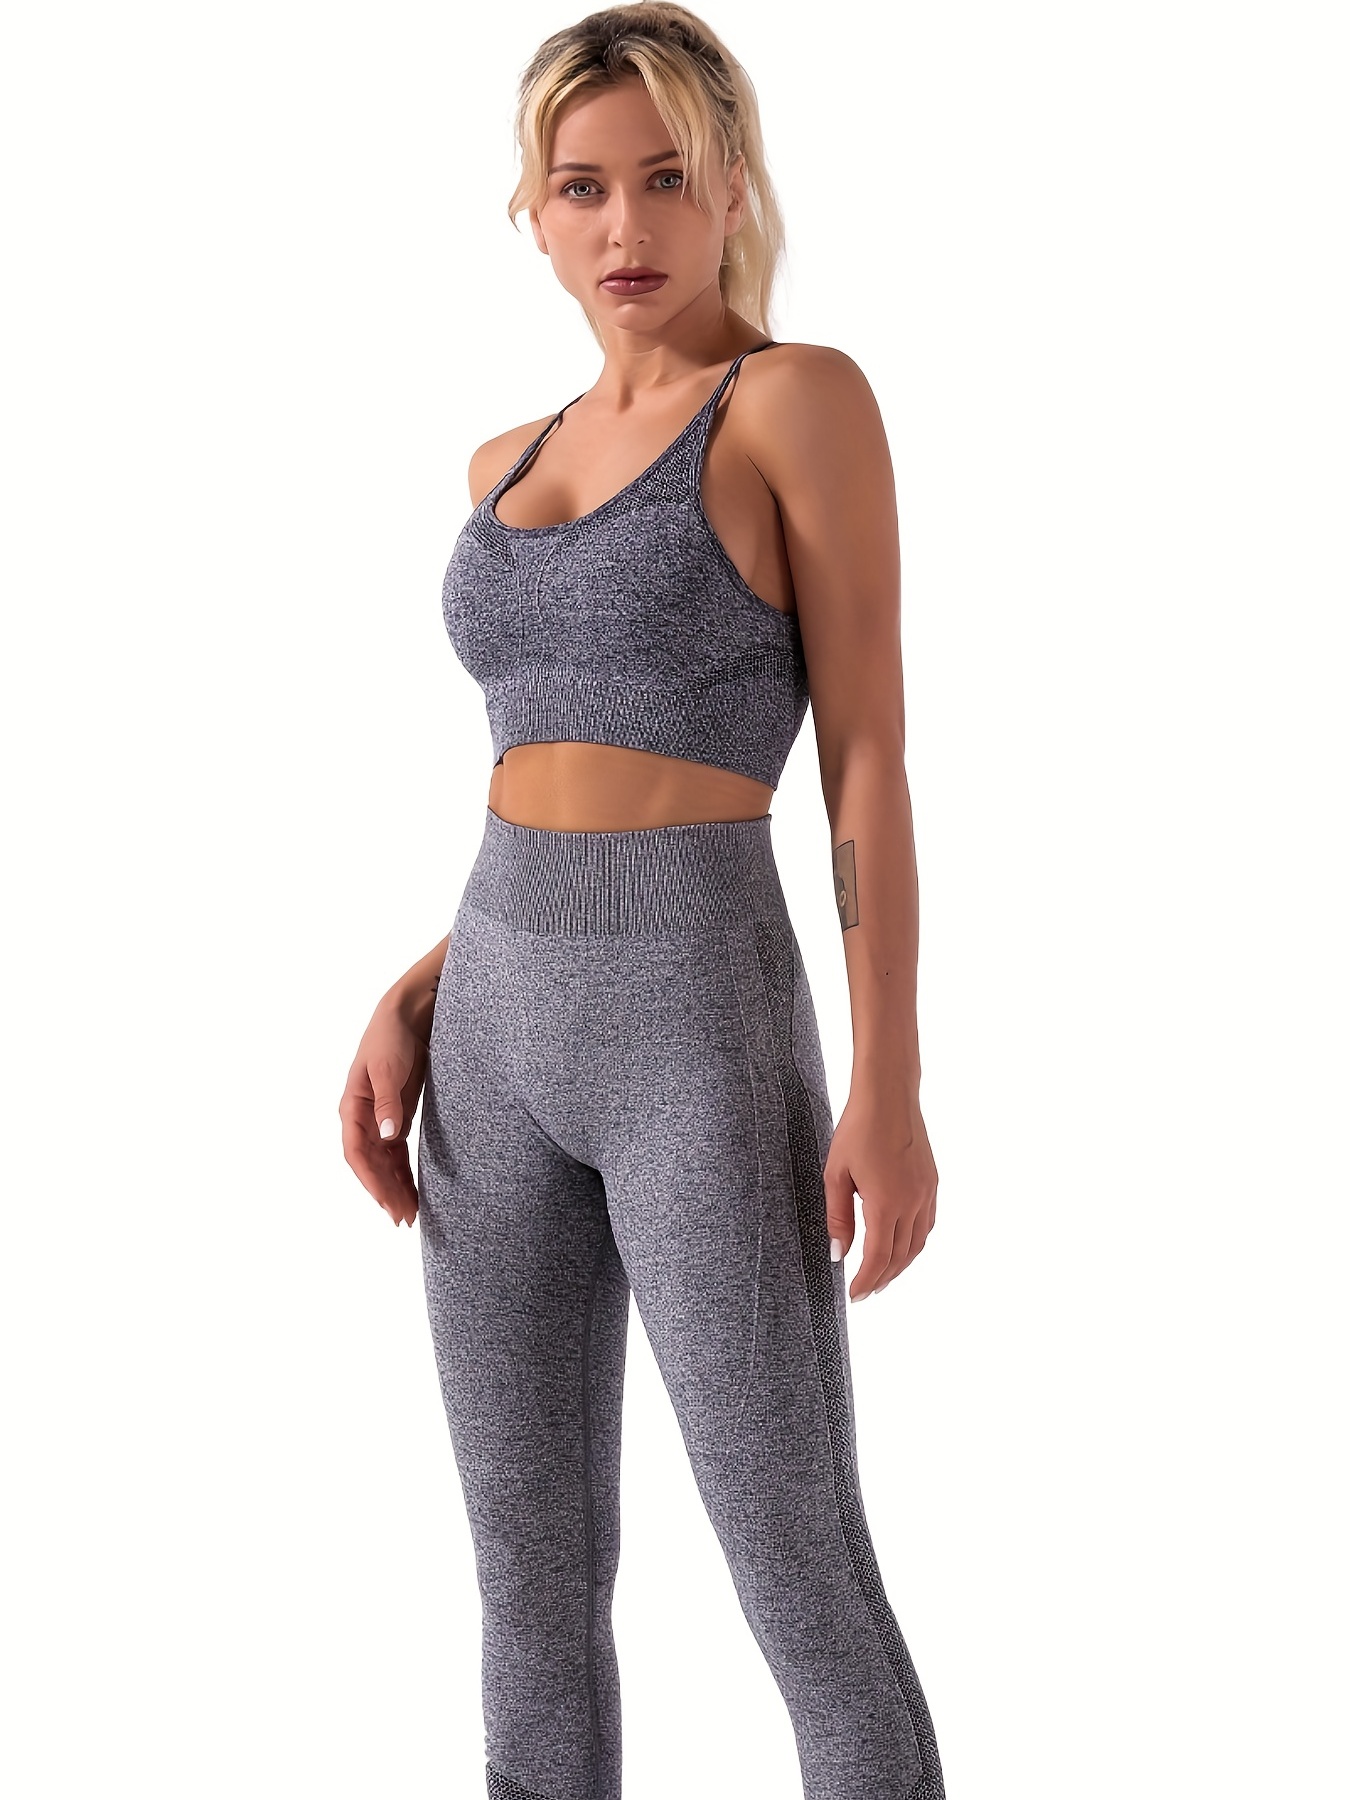 Long Sleeve Two Pcs Seamless Yoga Set Workout Clothes For Women Gym Sets  Womens Outfits Sports Set Sportswear Gym Clothing Suit